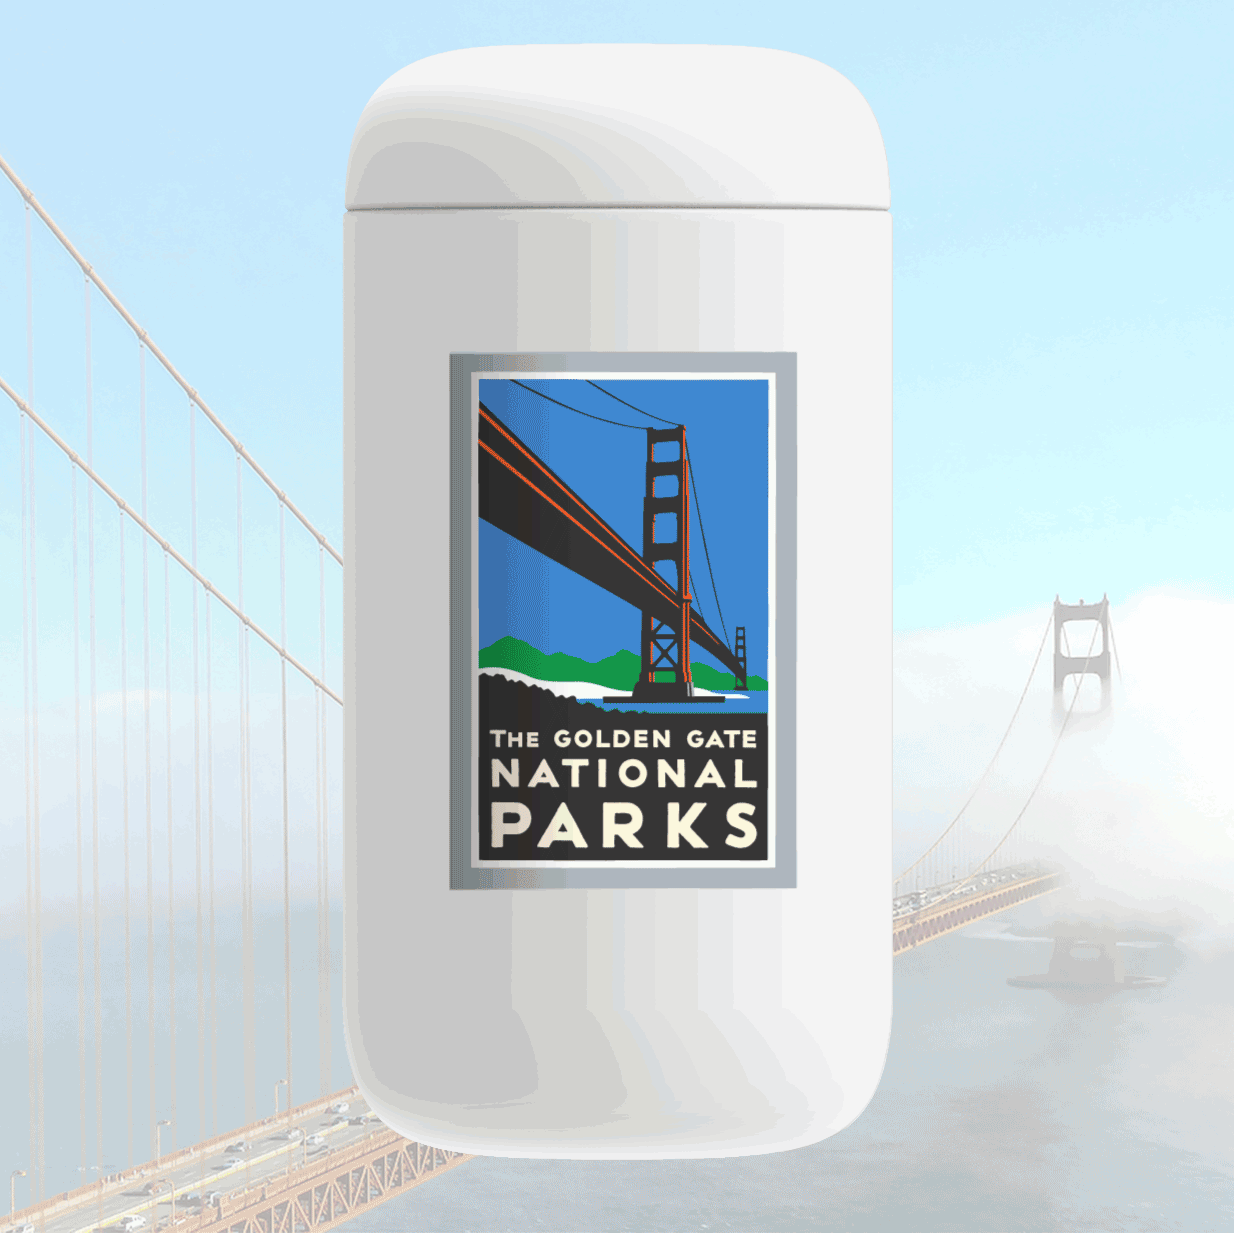 Golden Gate National Parks travel coffee mugs thermoses made in partnership with San Francisco brand Fellow